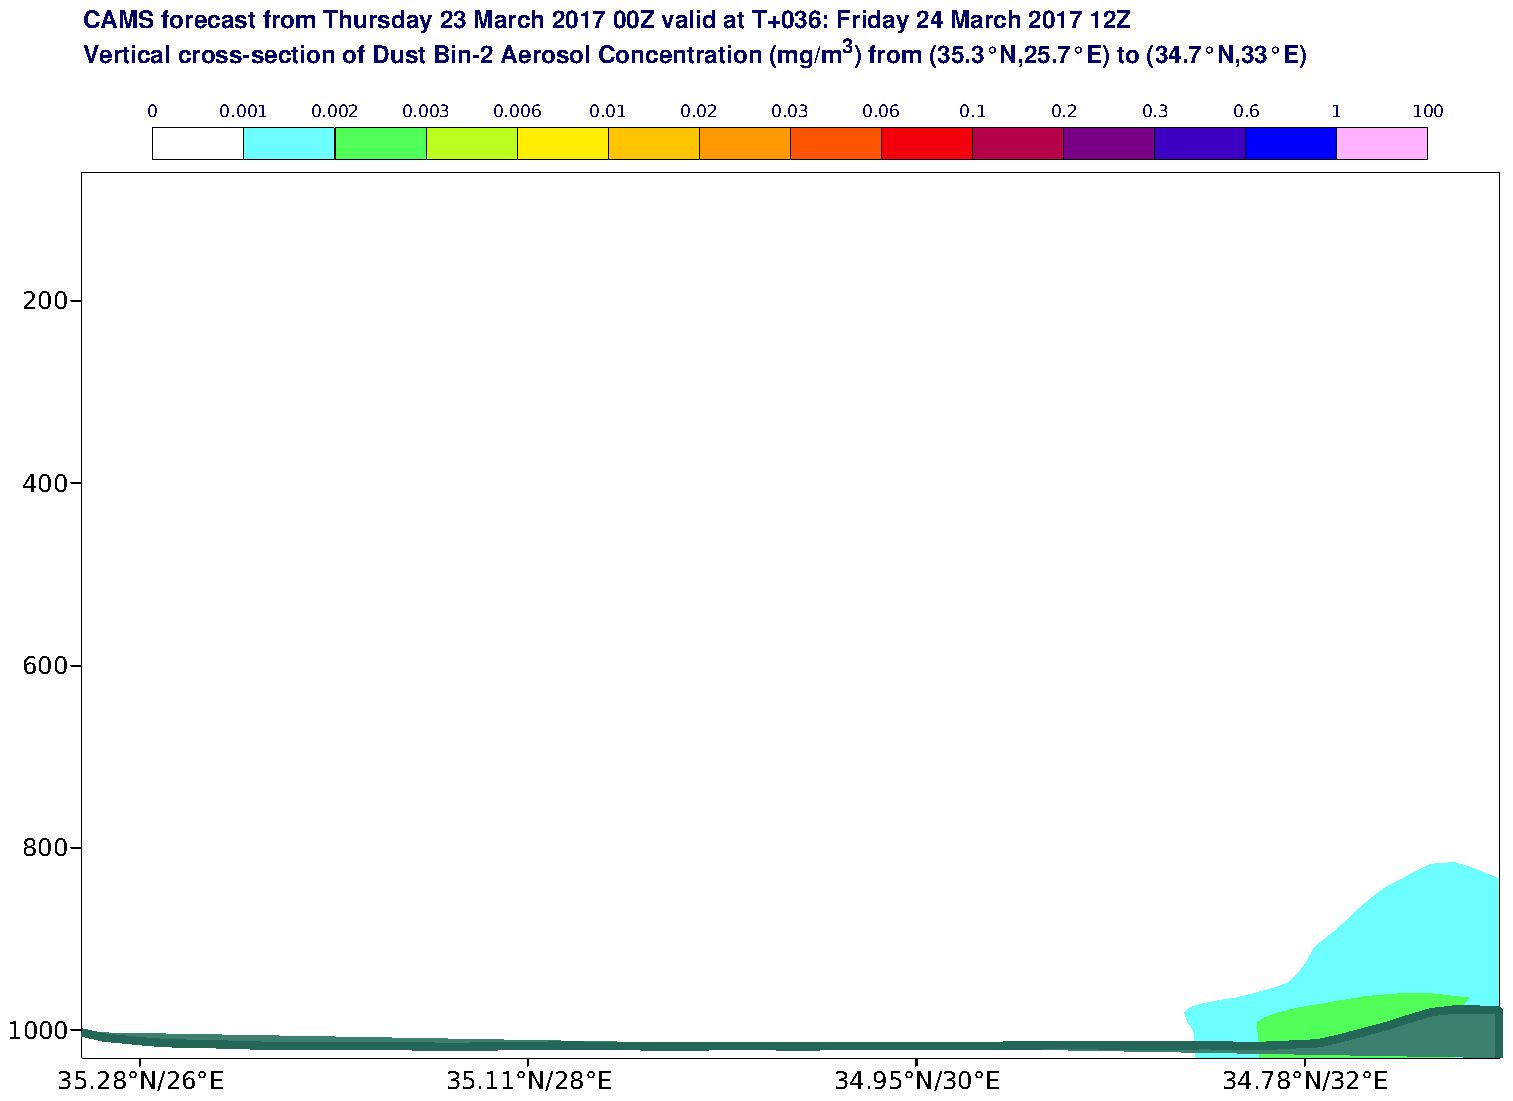 Vertical cross-section of Dust Bin-2 Aerosol Concentration (mg/m3) valid at T36 - 2017-03-24 12:00